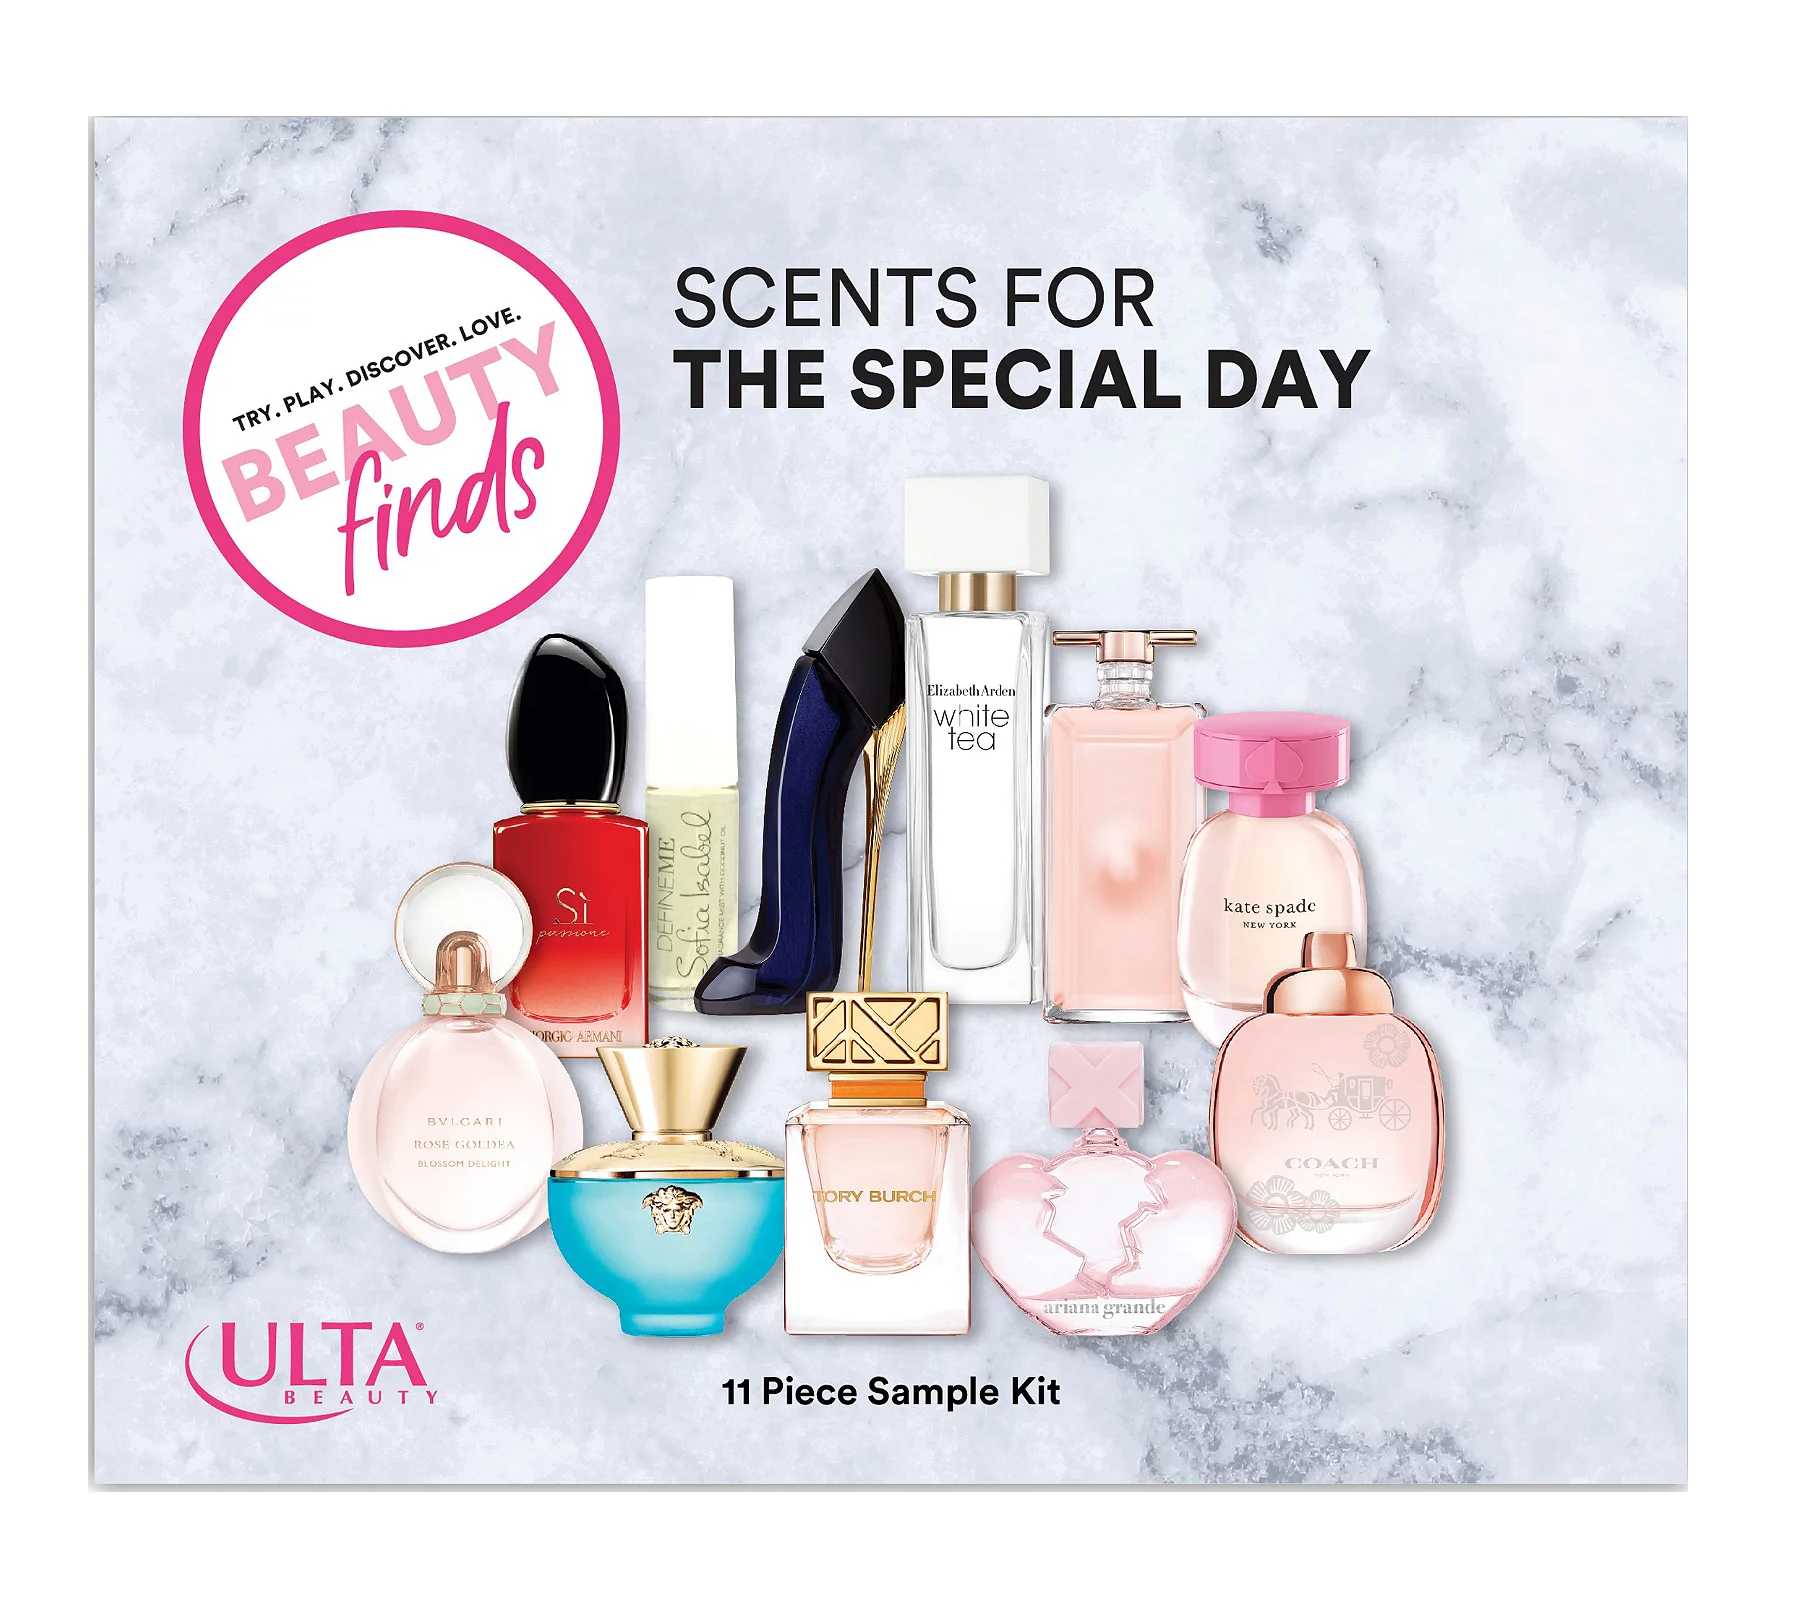 ULTA Summer Bridal Sampler Kit 12 Scents For The Special Day! Hello